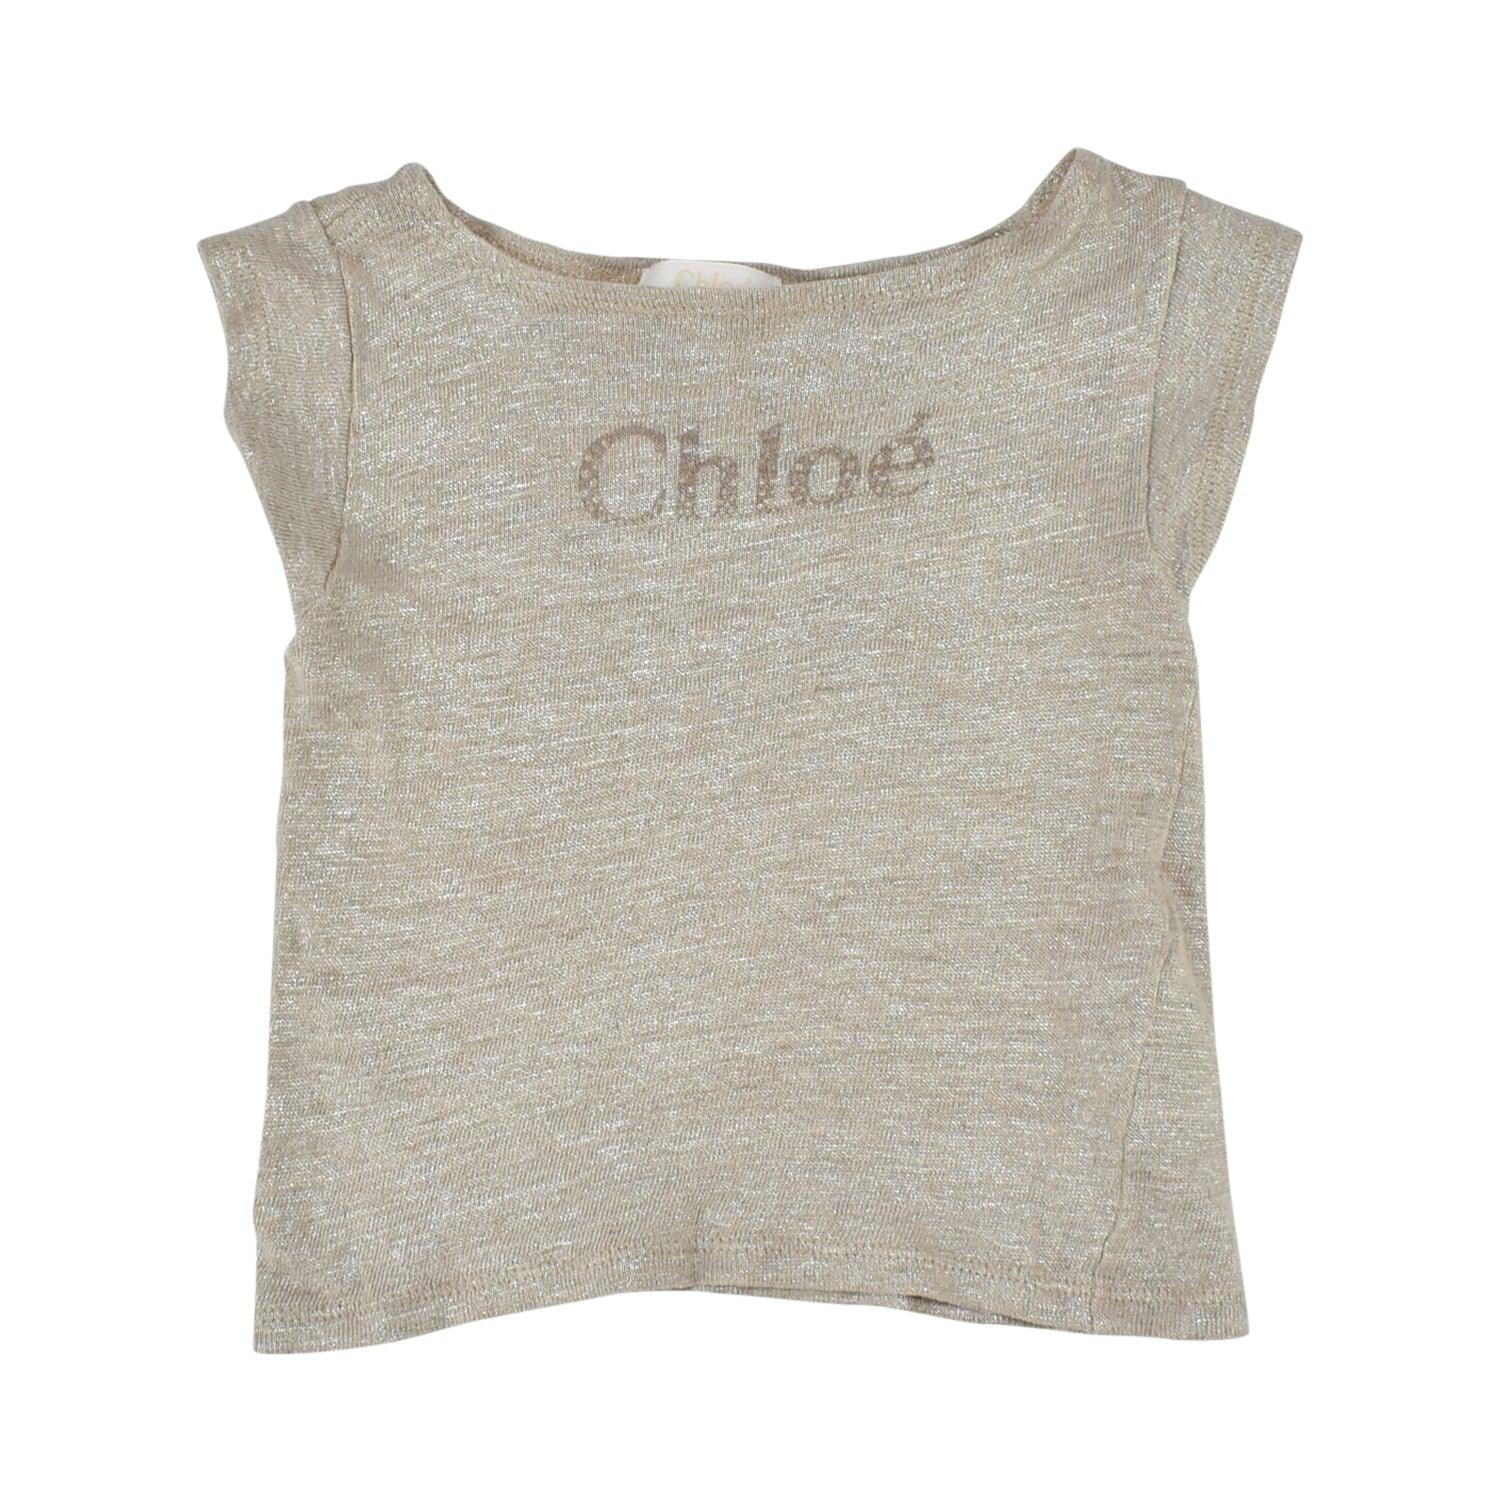 Chloe T-Shirt - Youth's 4 - Fashionably Yours